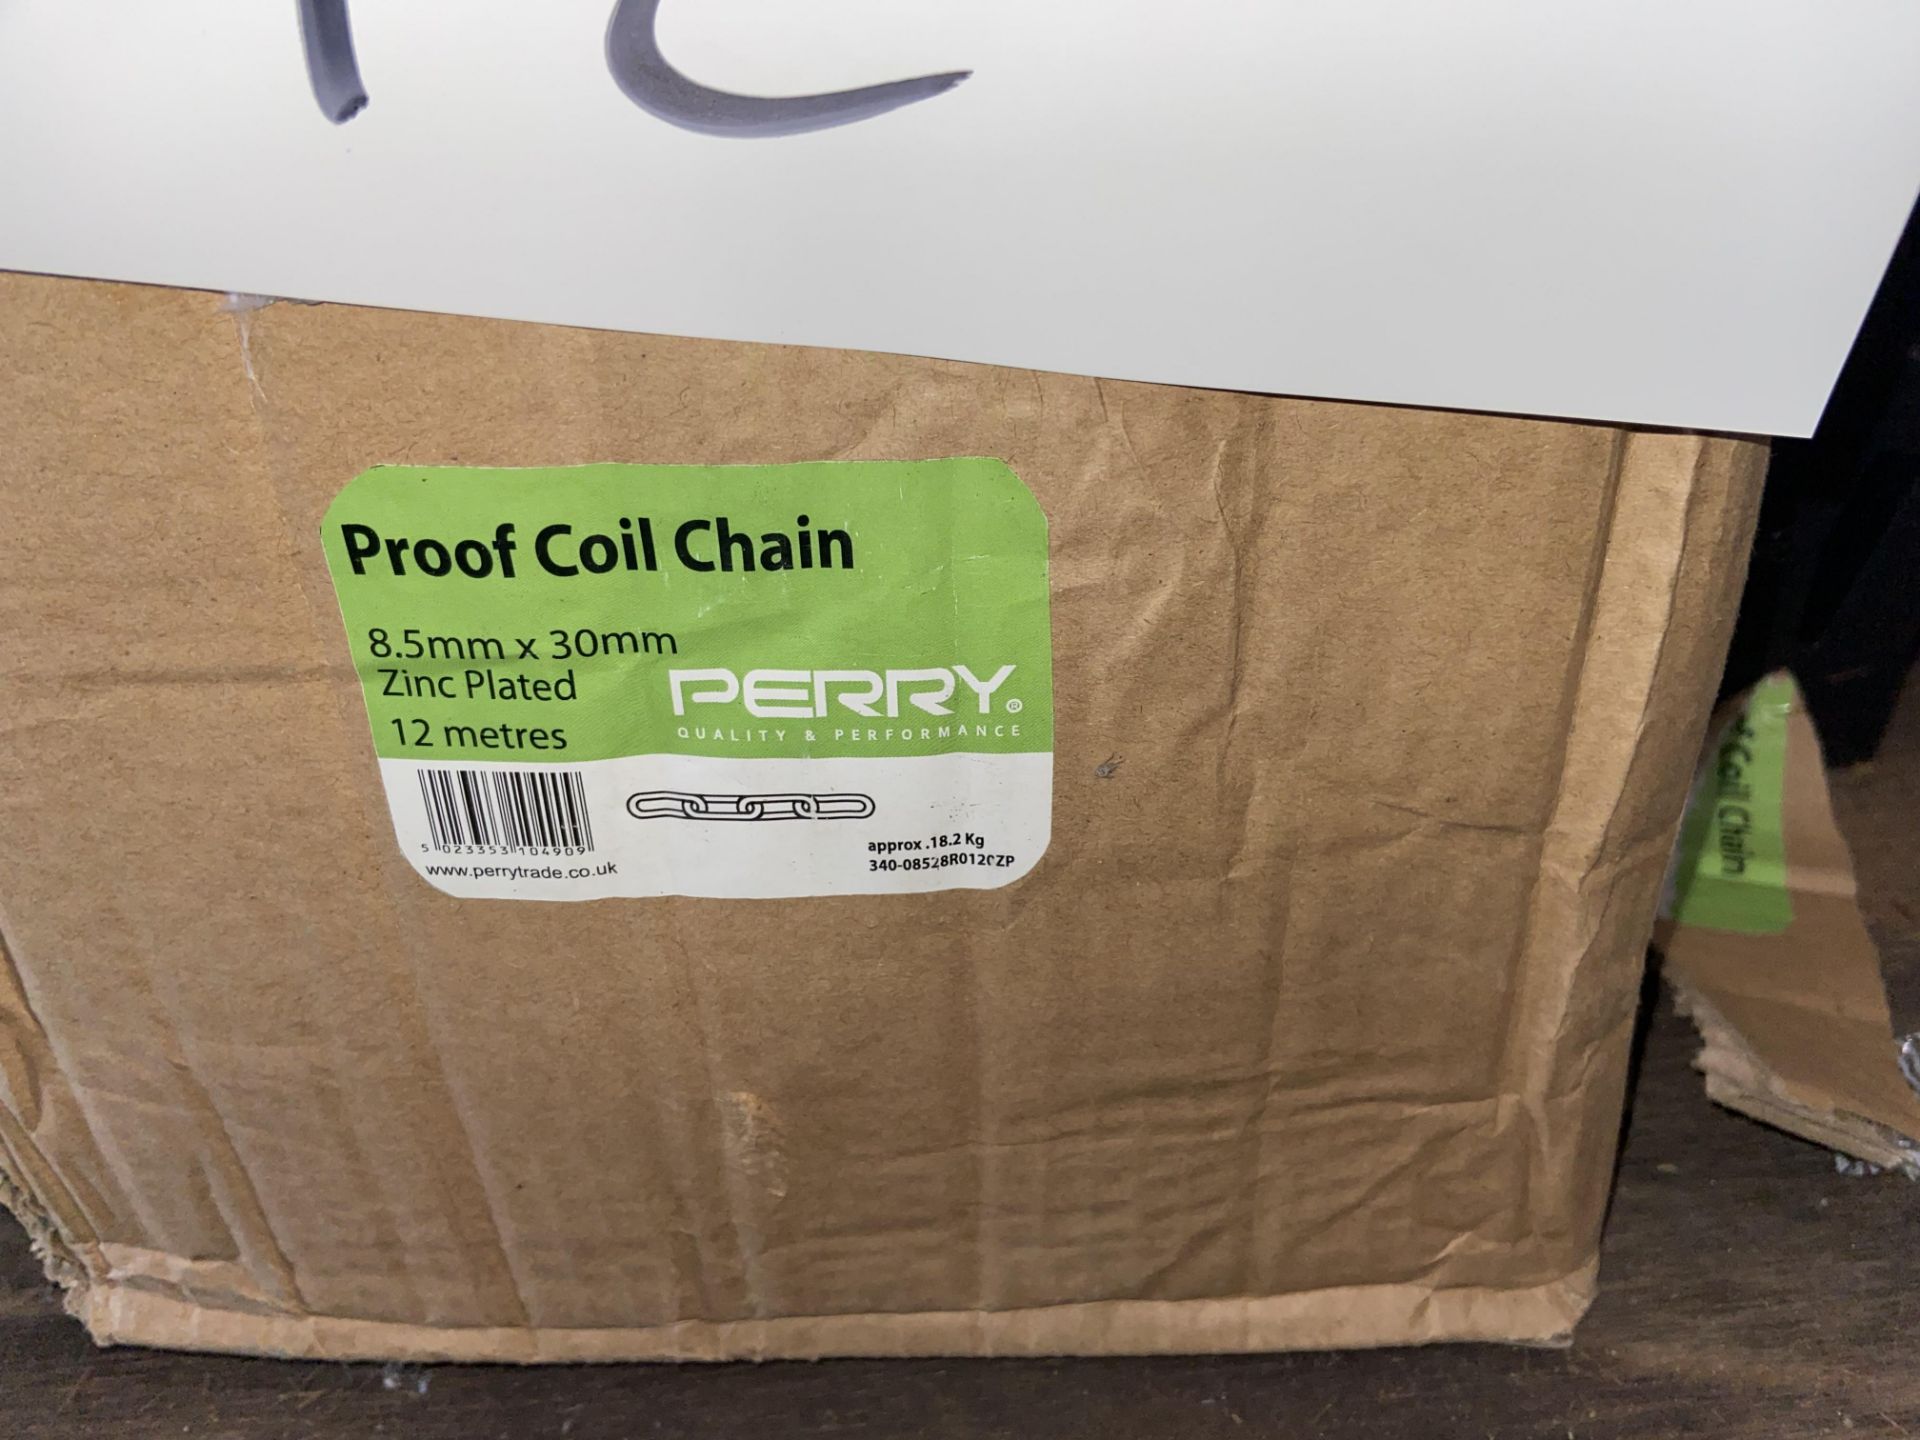 Six Boxes of Perry Zinc Plated Proof Coil Chain, 8.5mm x 30mm x 12mPlease read the following - Bild 2 aus 2